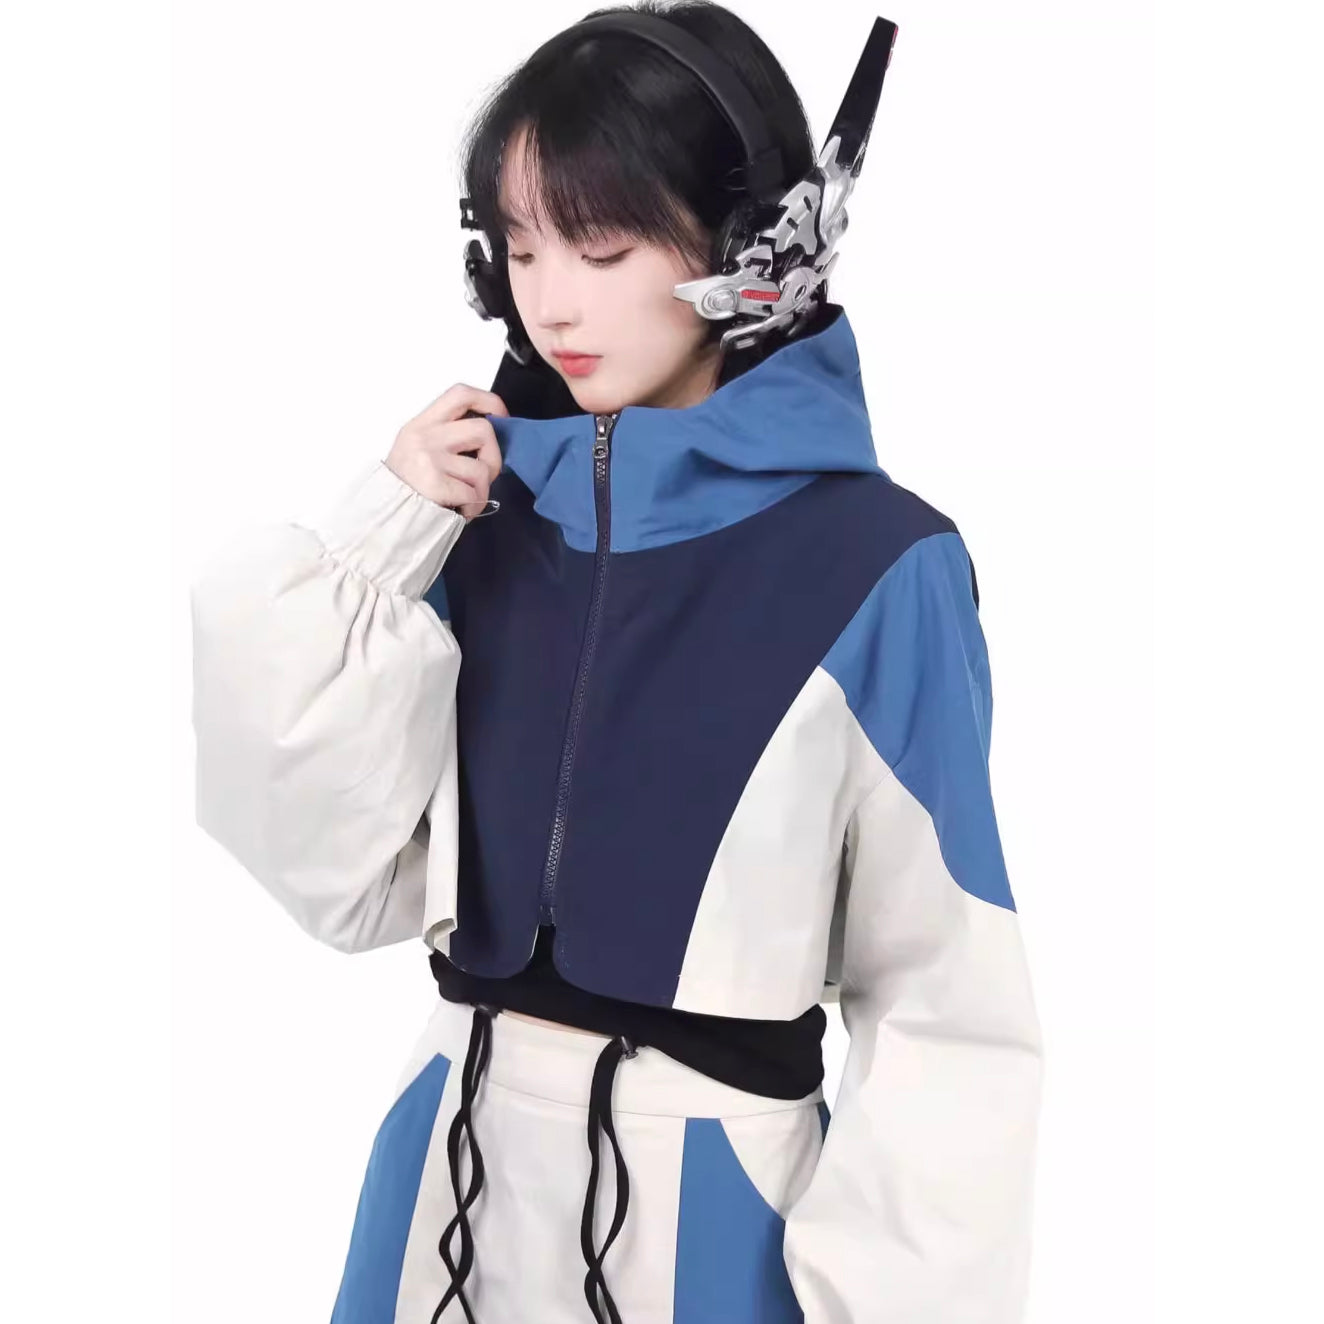 Futuristic Girl Like an Astronaut Jacket, Tops and Bottoms